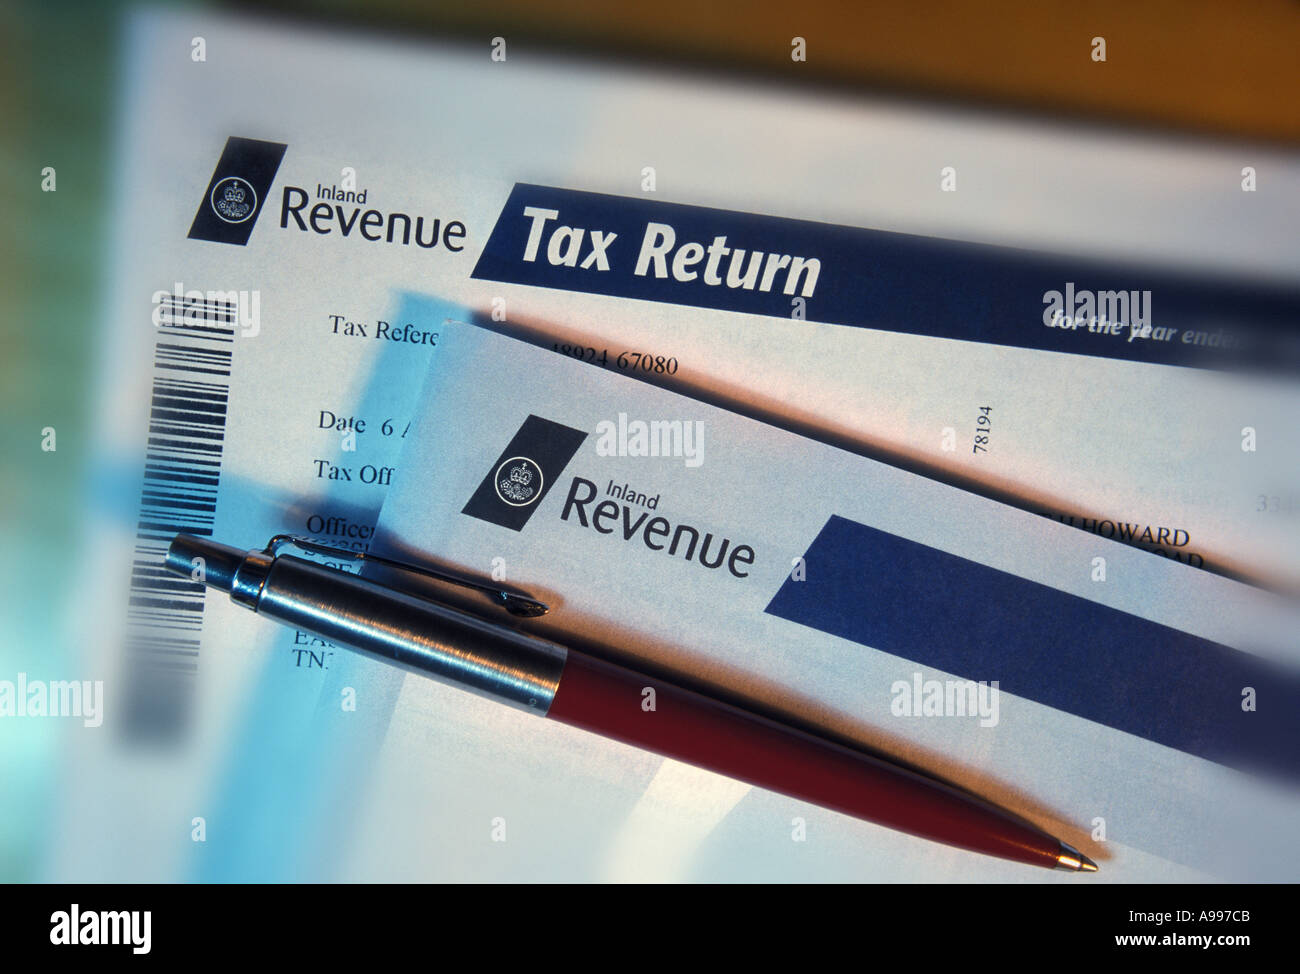 tax return form for Inland Revenue UK Stock Photo